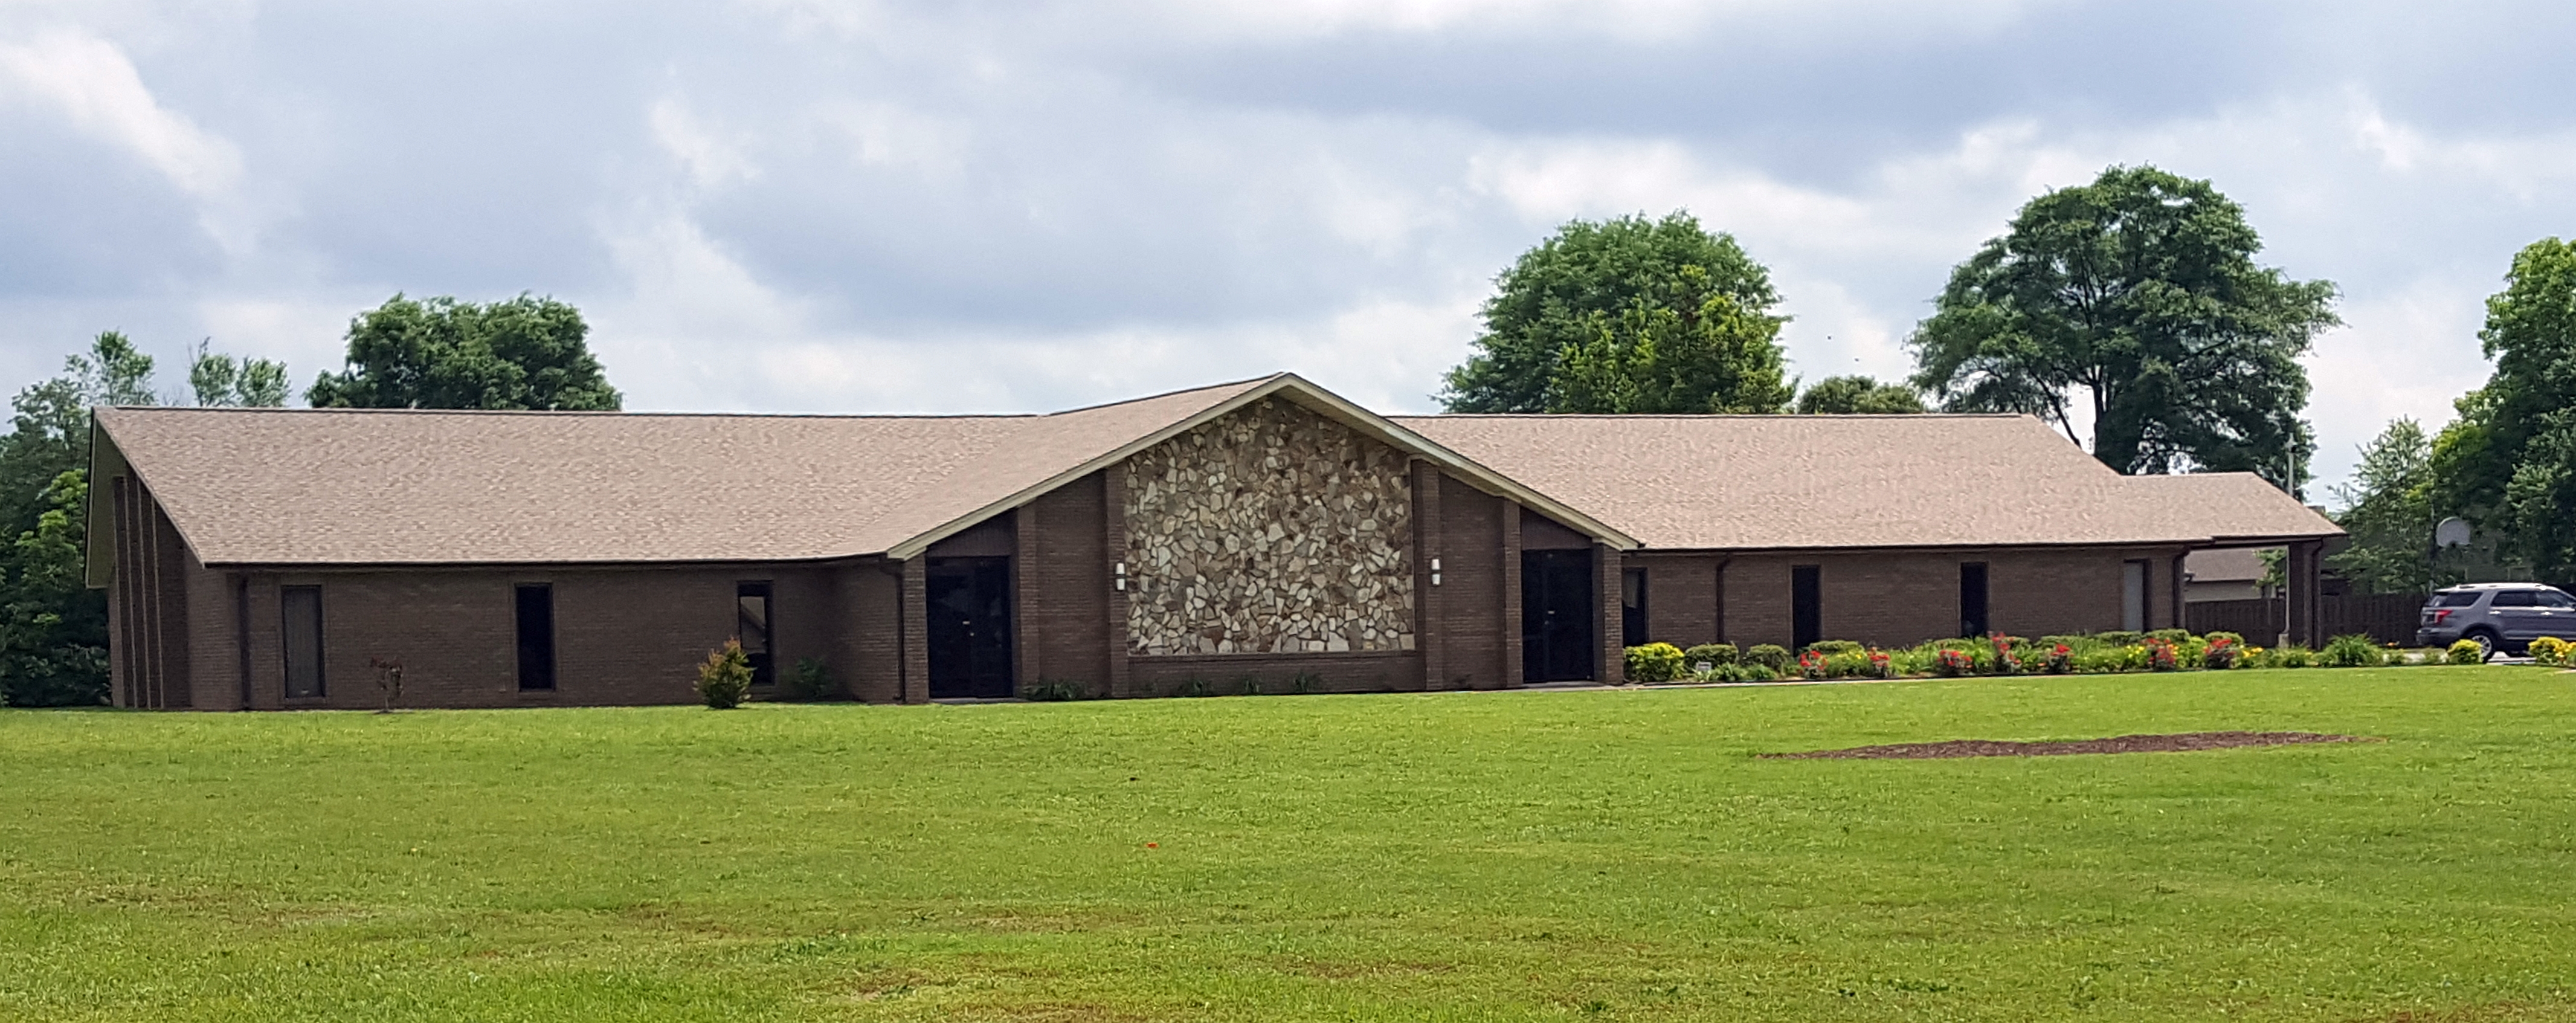 Meeting place of the Mauldin church of Christ